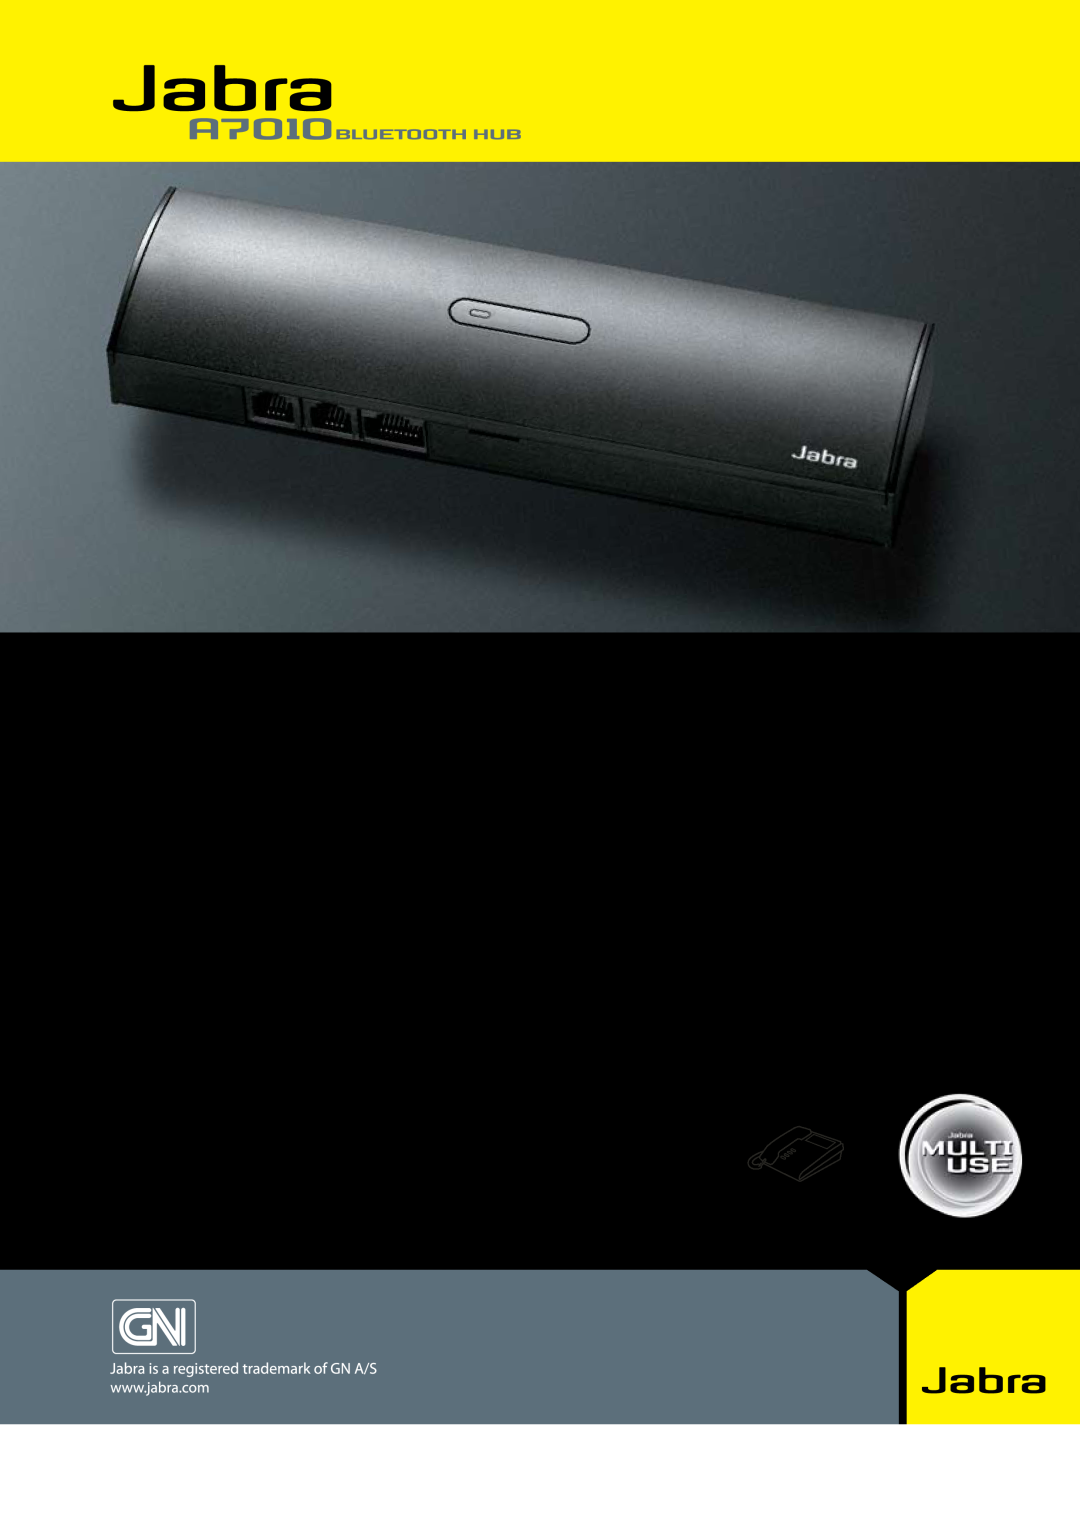 Jabra manual A7010BLUETOOTH HUB, Bluetooth enabler for desk phones, Stay connected without being plugged in 